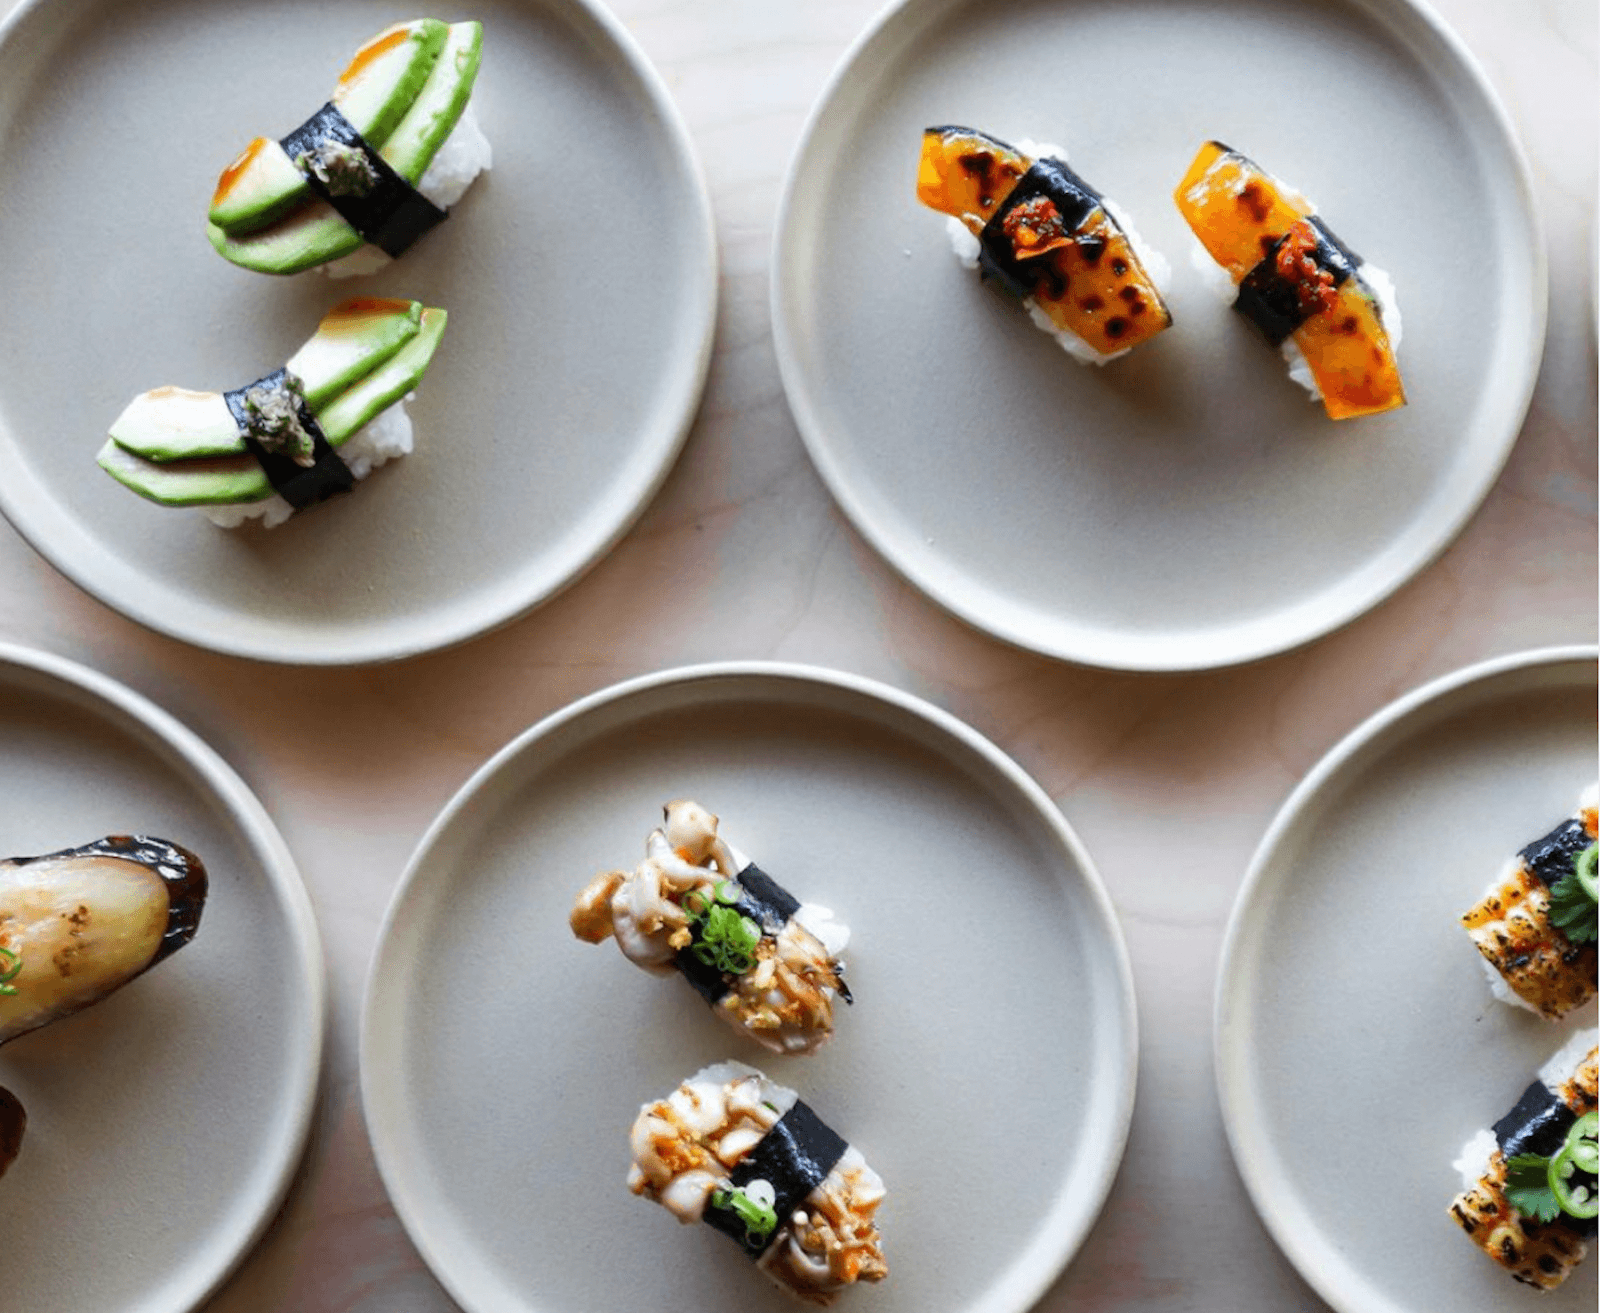 Neighborhood Sushi in Austin - Fusion of Classic Japanese Sushi with a Texas Flair